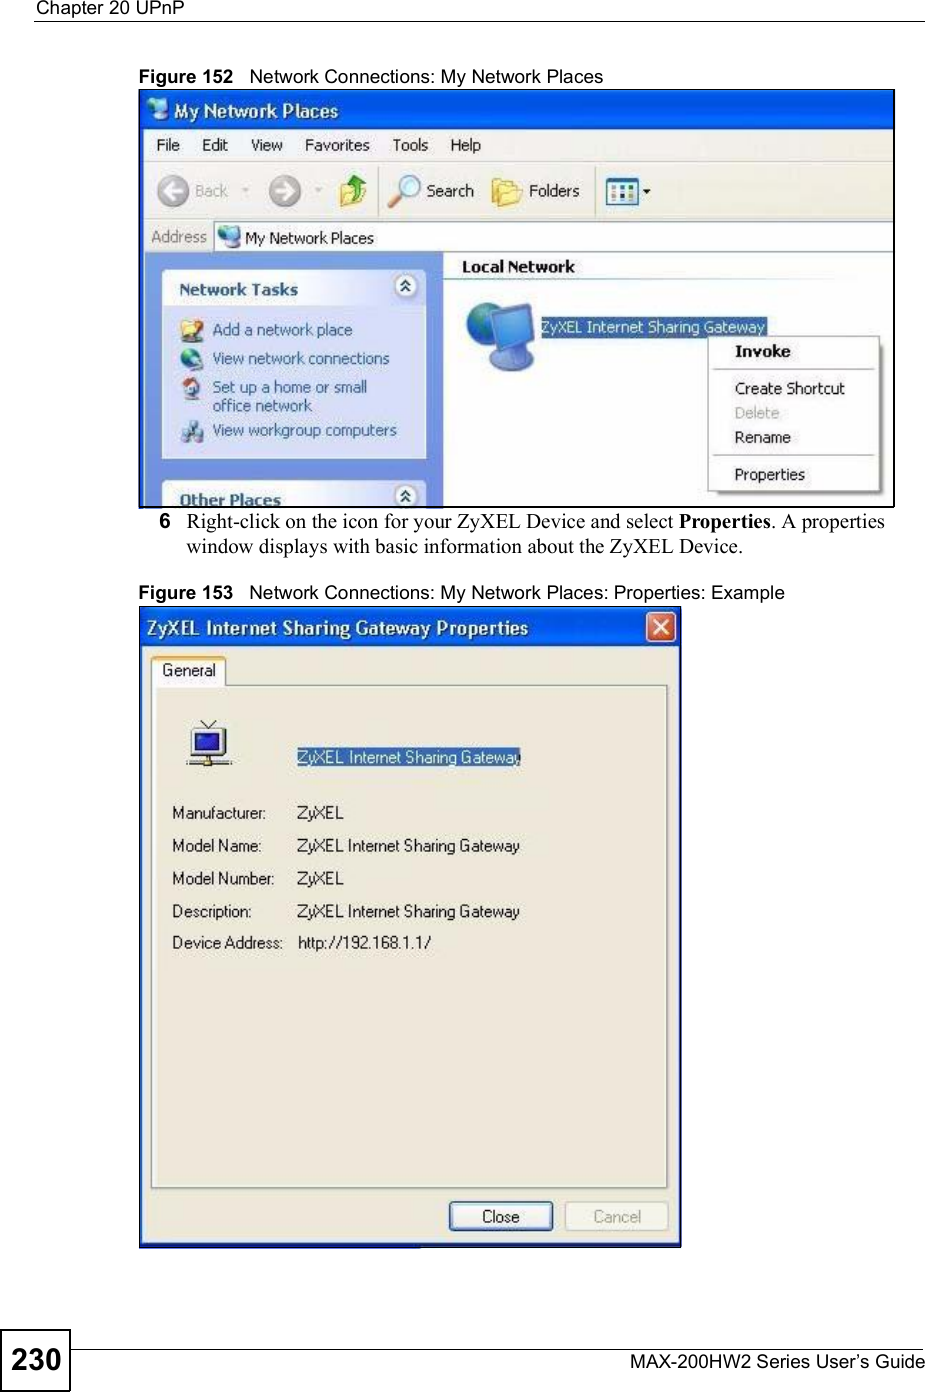 Chapter 20UPnPMAX-200HW2 Series User s Guide230Figure 152   Network Connections: My Network Places6Right-click on the icon for your ZyXEL Device and select Properties. A properties window displays with basic information about the ZyXEL Device. Figure 153   Network Connections: My Network Places: Properties: Example